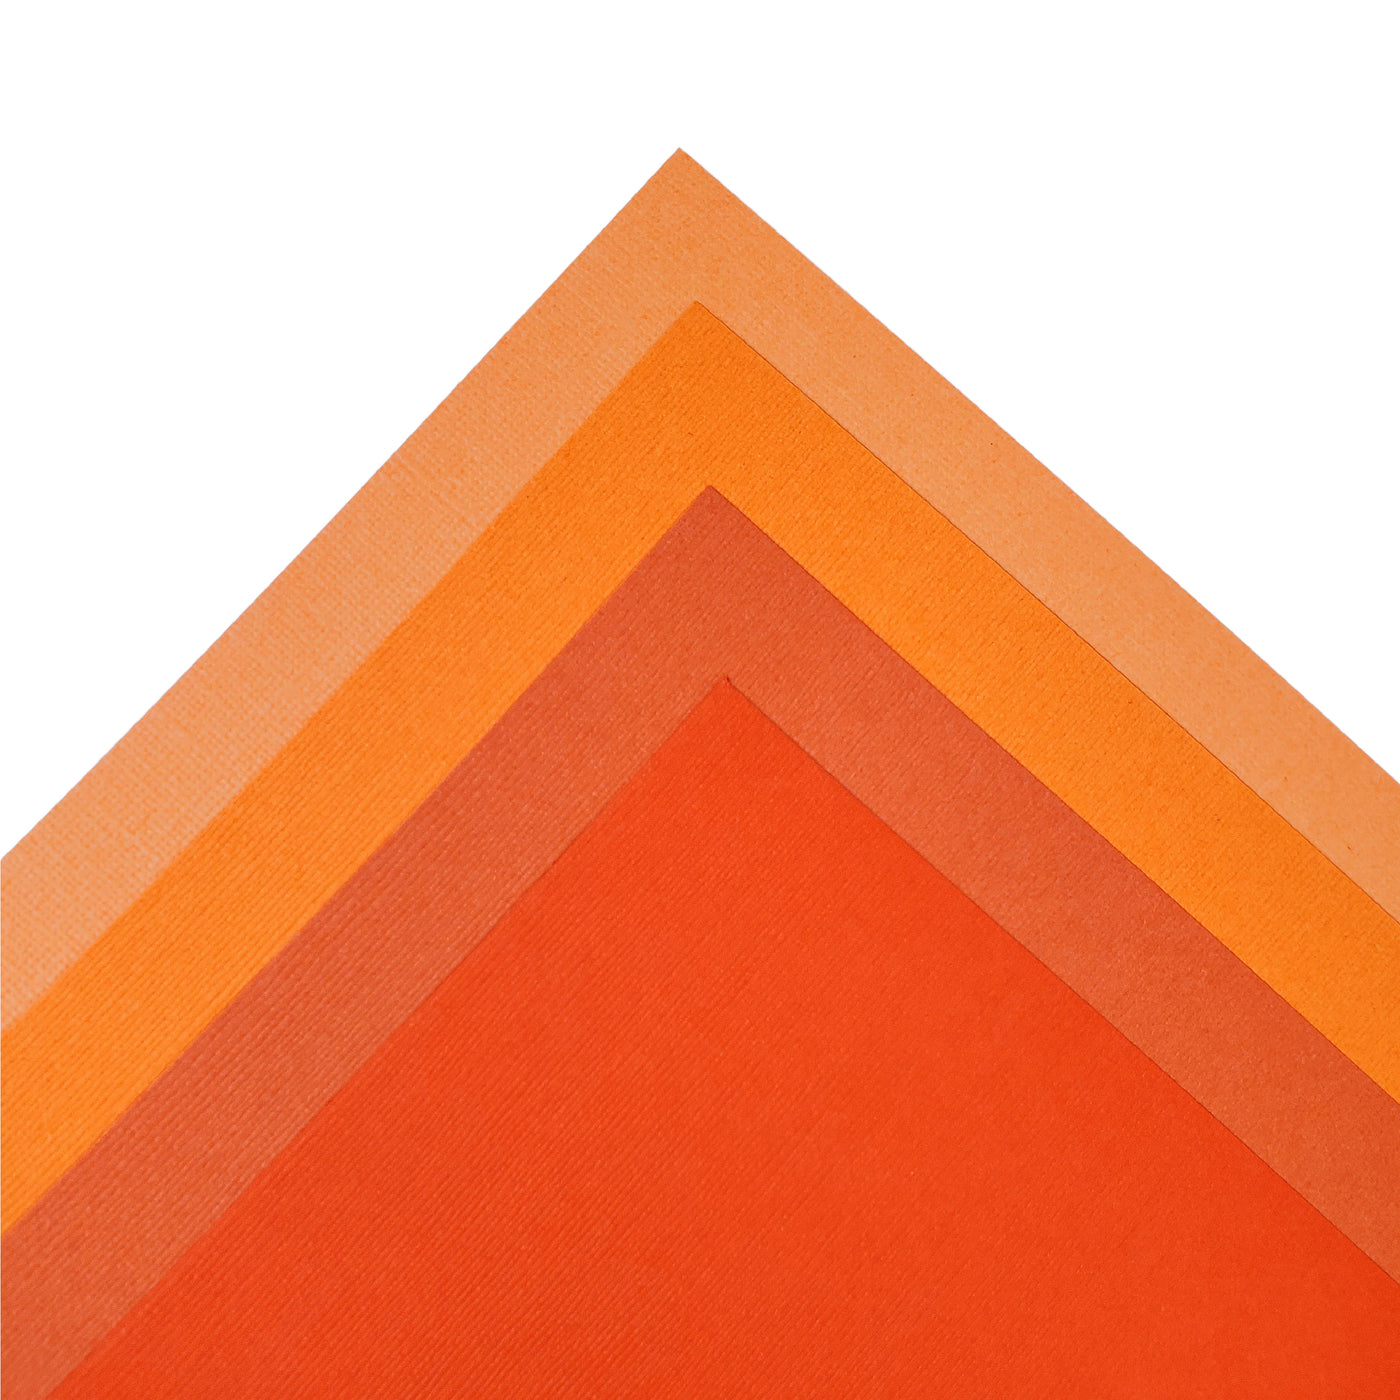 The Orange monochromatic assortment includes three (3) each of four (4) shades of orange colors of Bazzill textured cardstock.